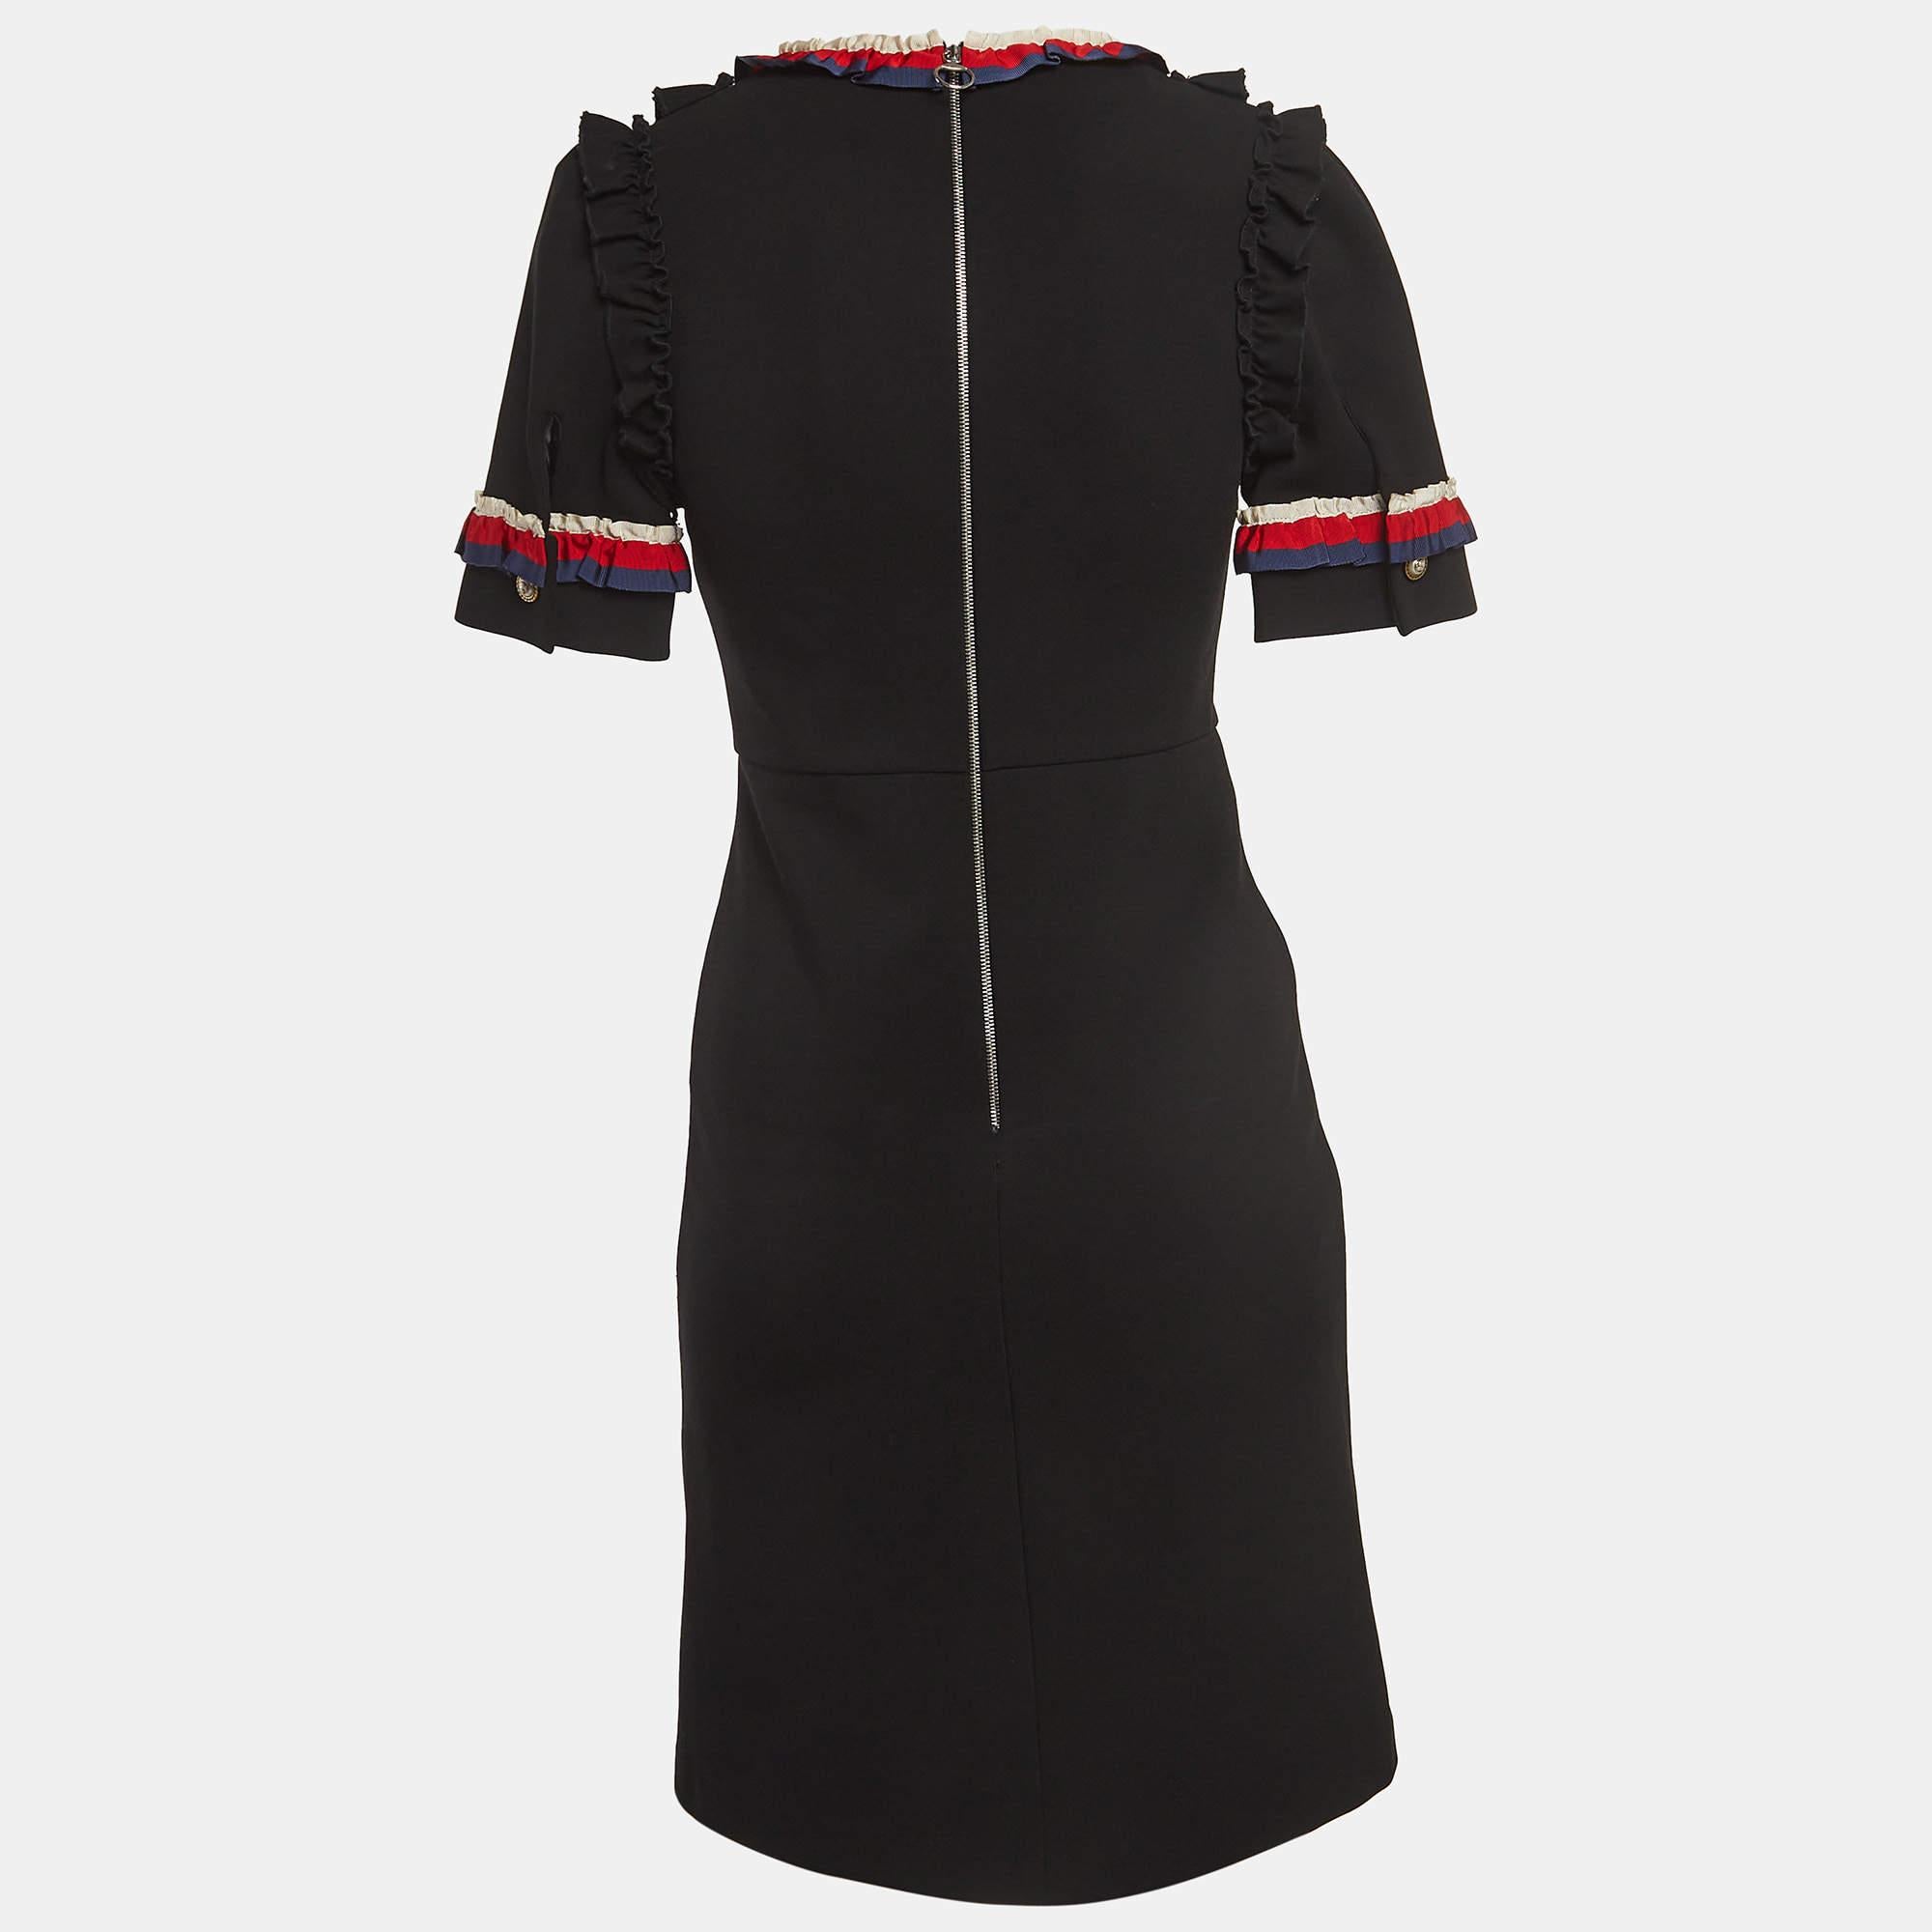 Elevate your style with the Gucci dress. Crafted with meticulous attention to detail, this exquisite piece features elegant ruffles and signature web trim accents. Effortlessly chic, it exudes confidence and charm, making it a timeless addition to